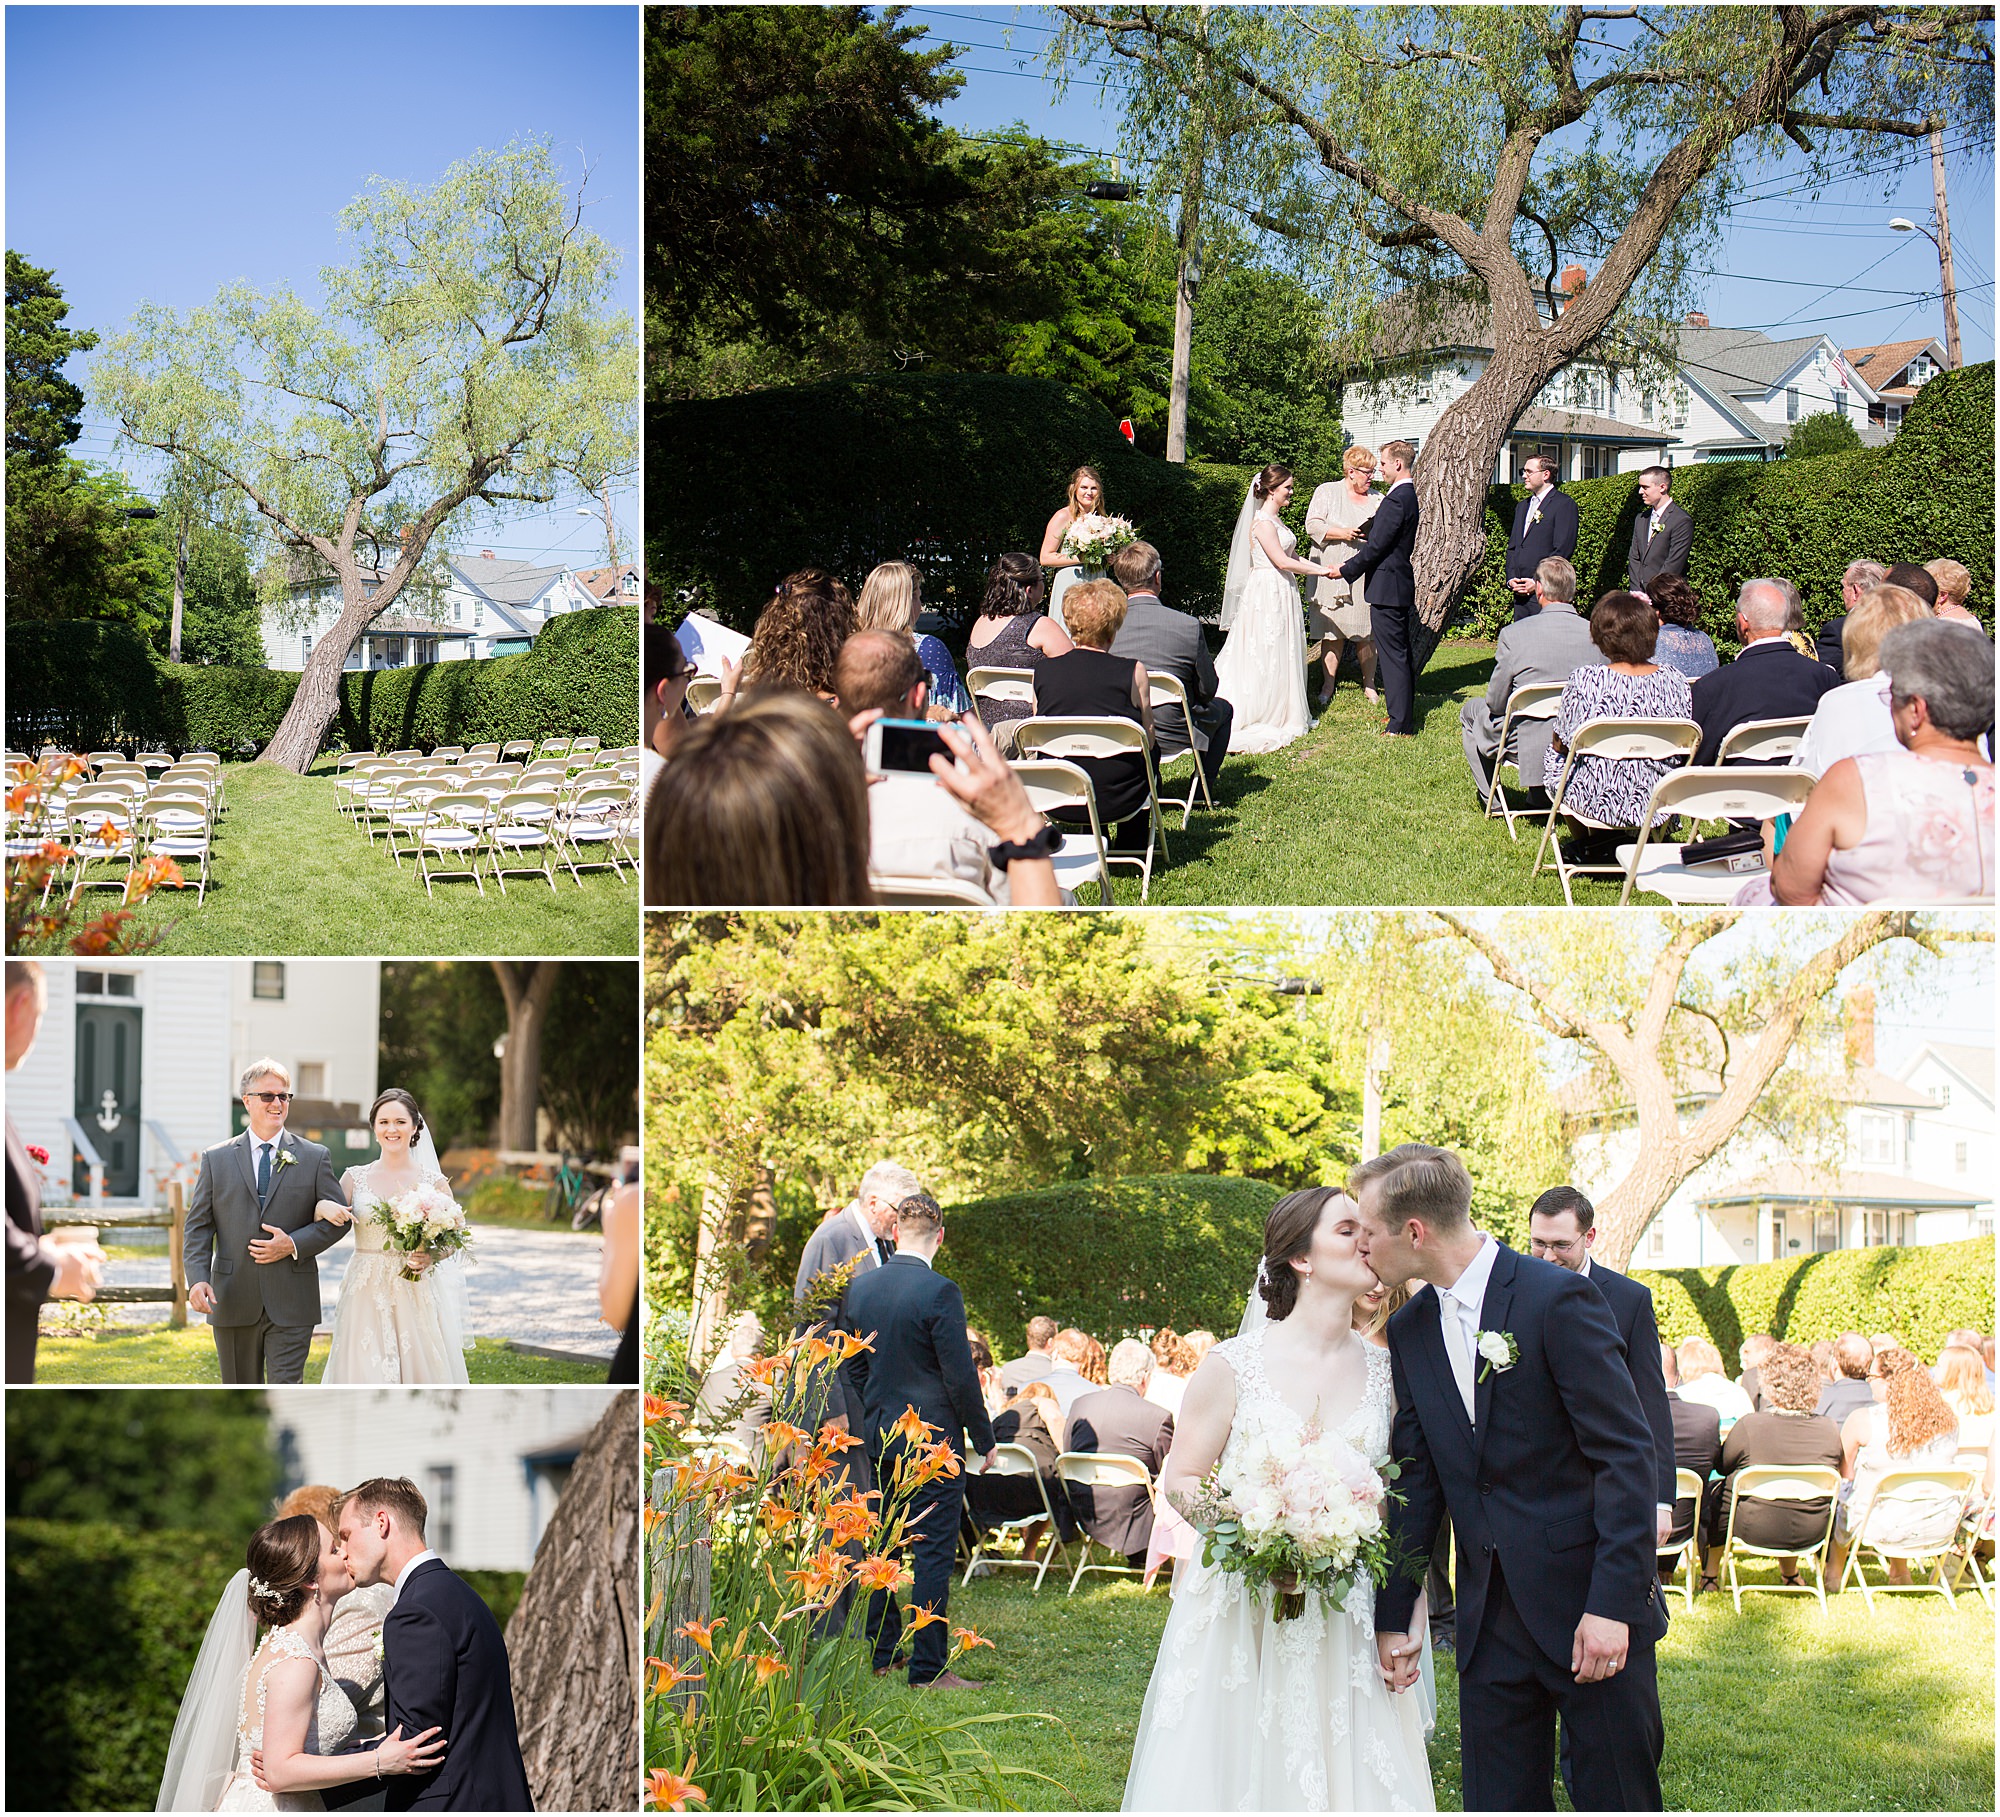 Best Wedding Venues in Cape May: The Chalfonte Hotel outdoor ceremony